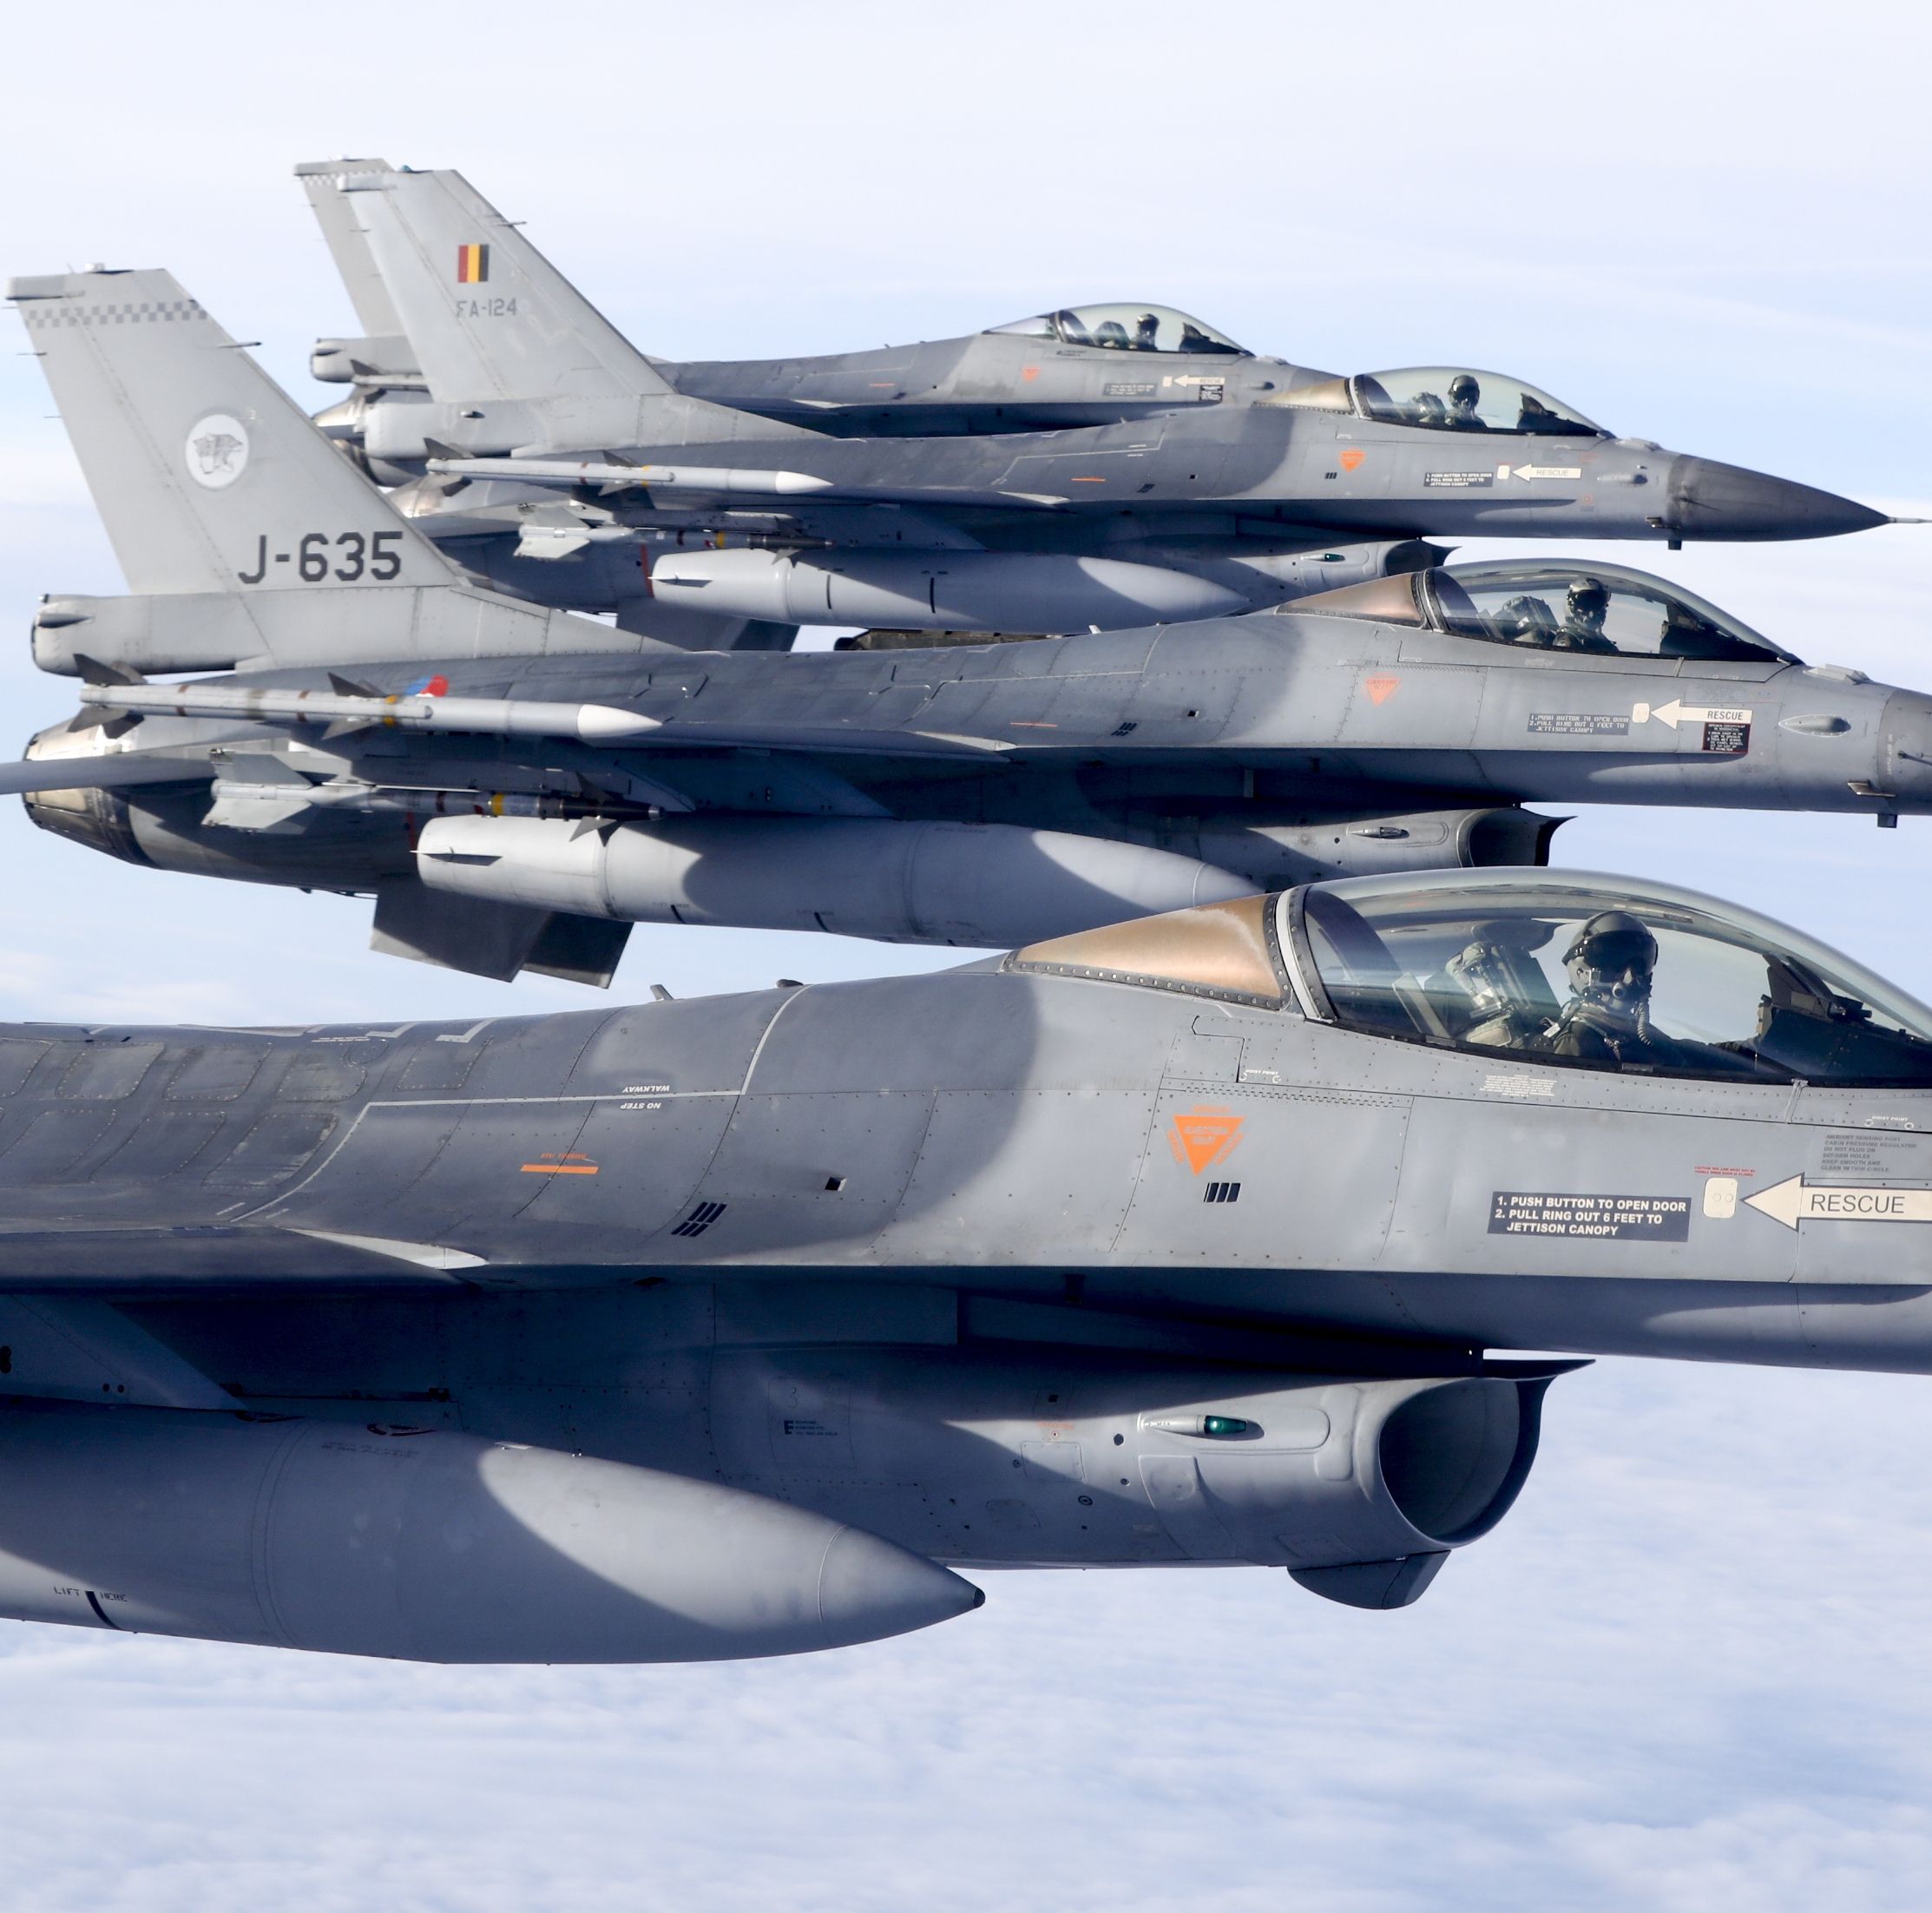 Ukraine Could Get F-16 Fighter Jets Next. Here's How They Would Impact the War